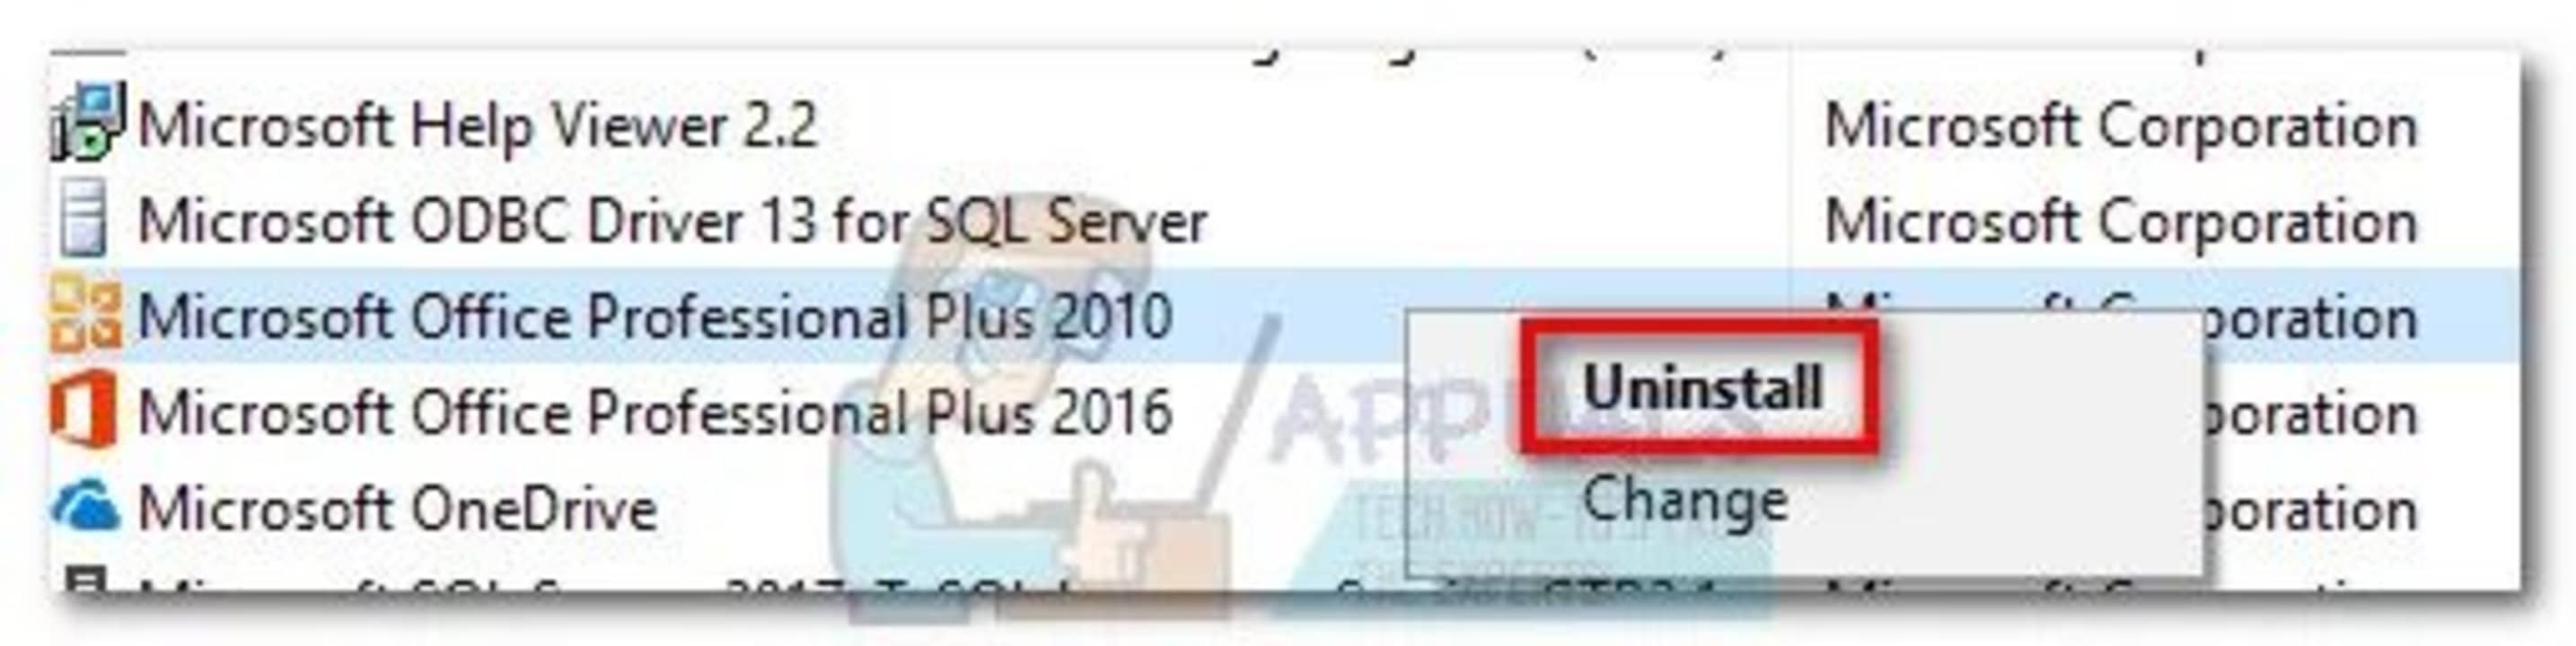 how to transfer office license from one computer to another